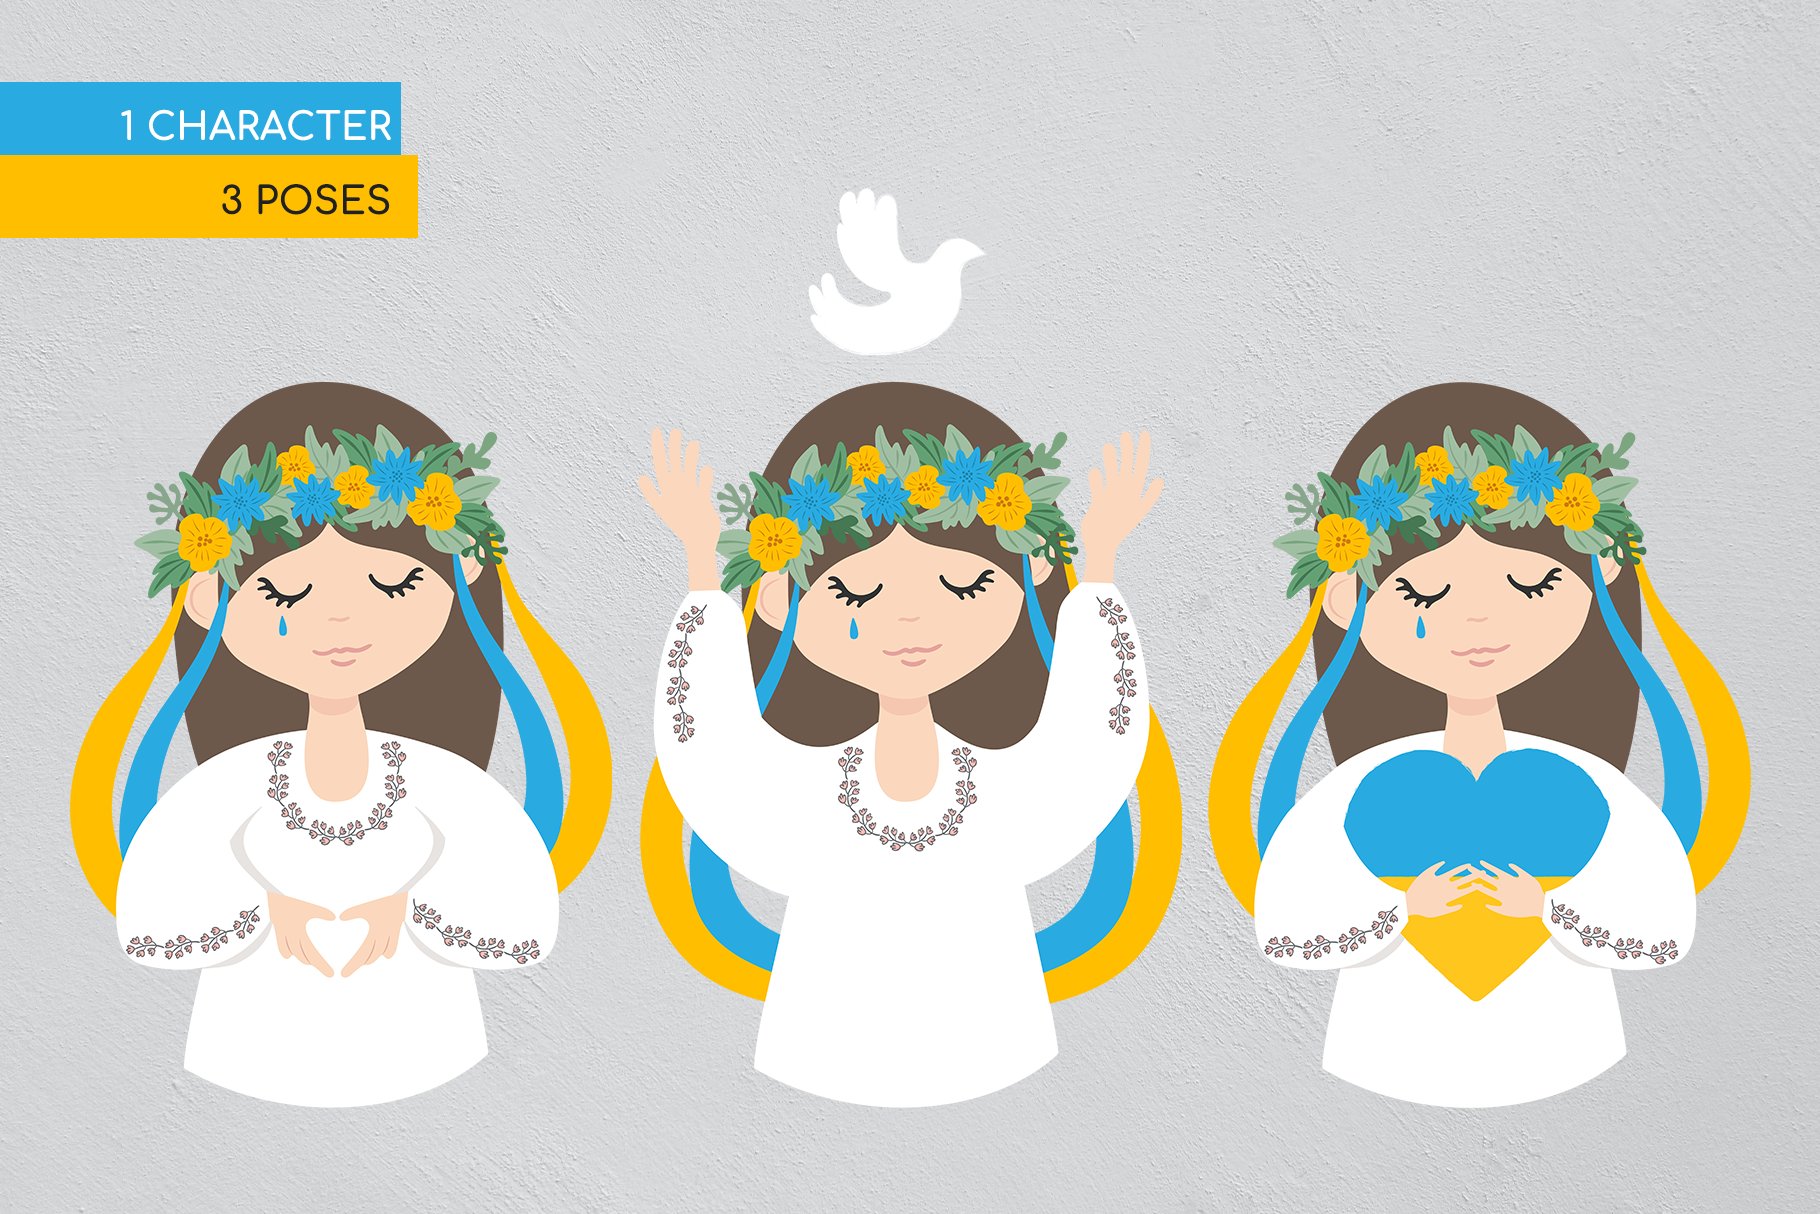 Make peace No war | Support Ukraine preview image.